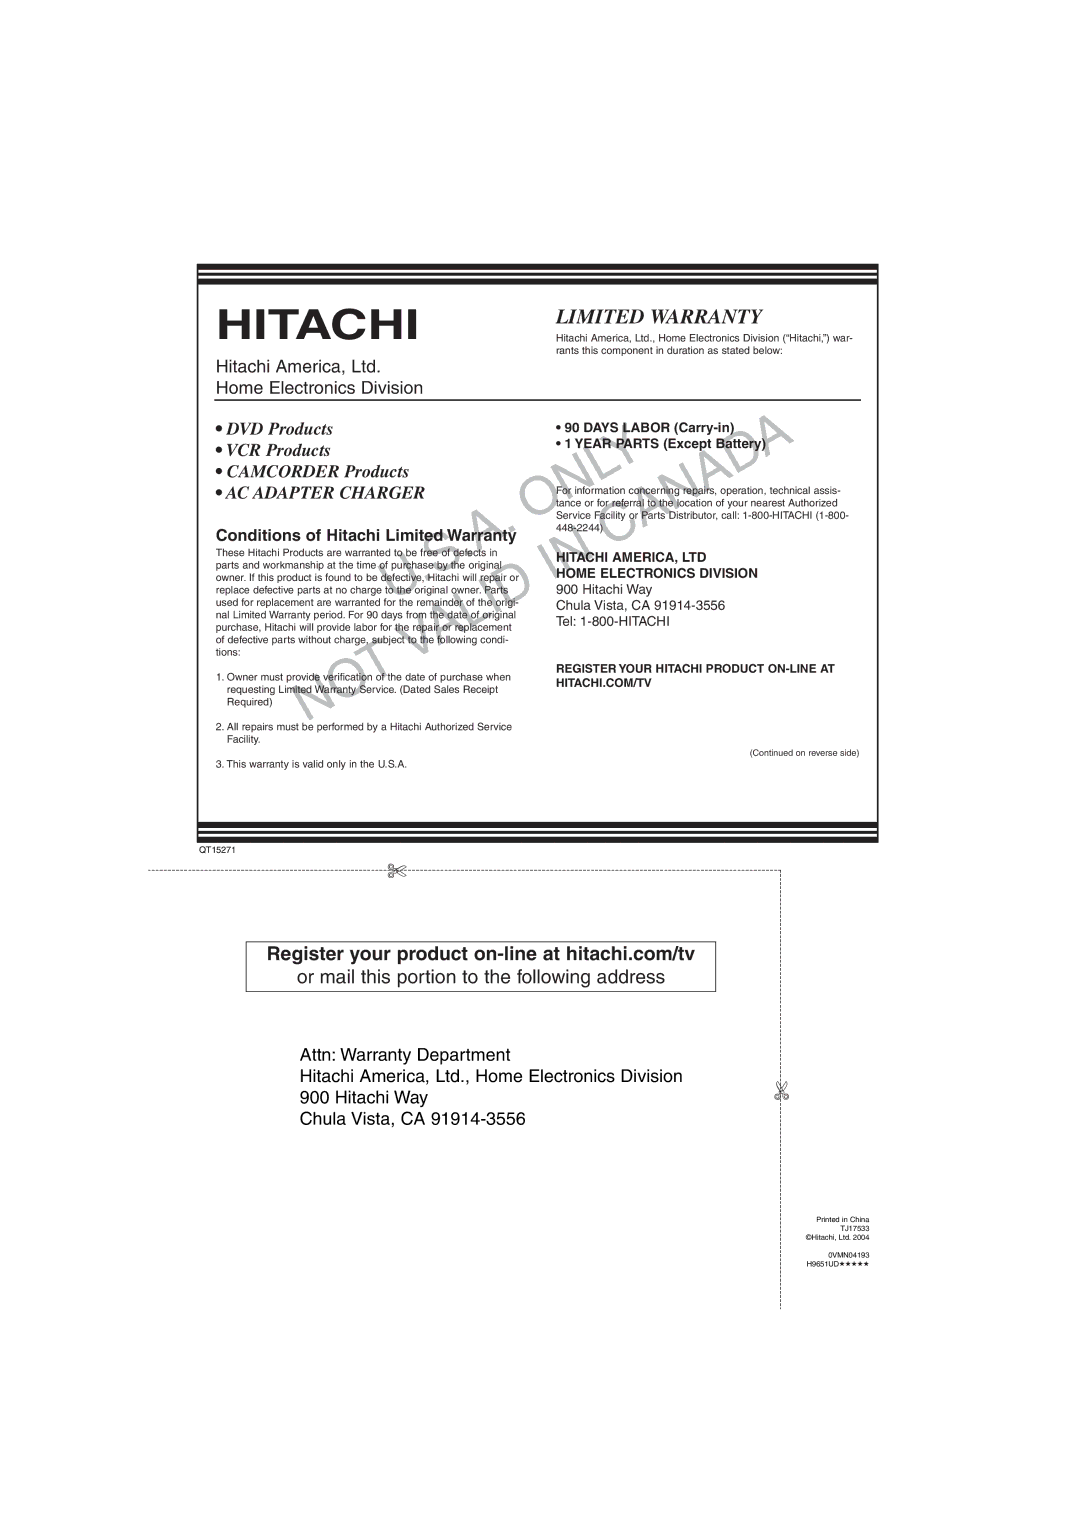 Hitachi DV PF74U instruction manual Days Labor Carry-in, Year Parts Except Battery 